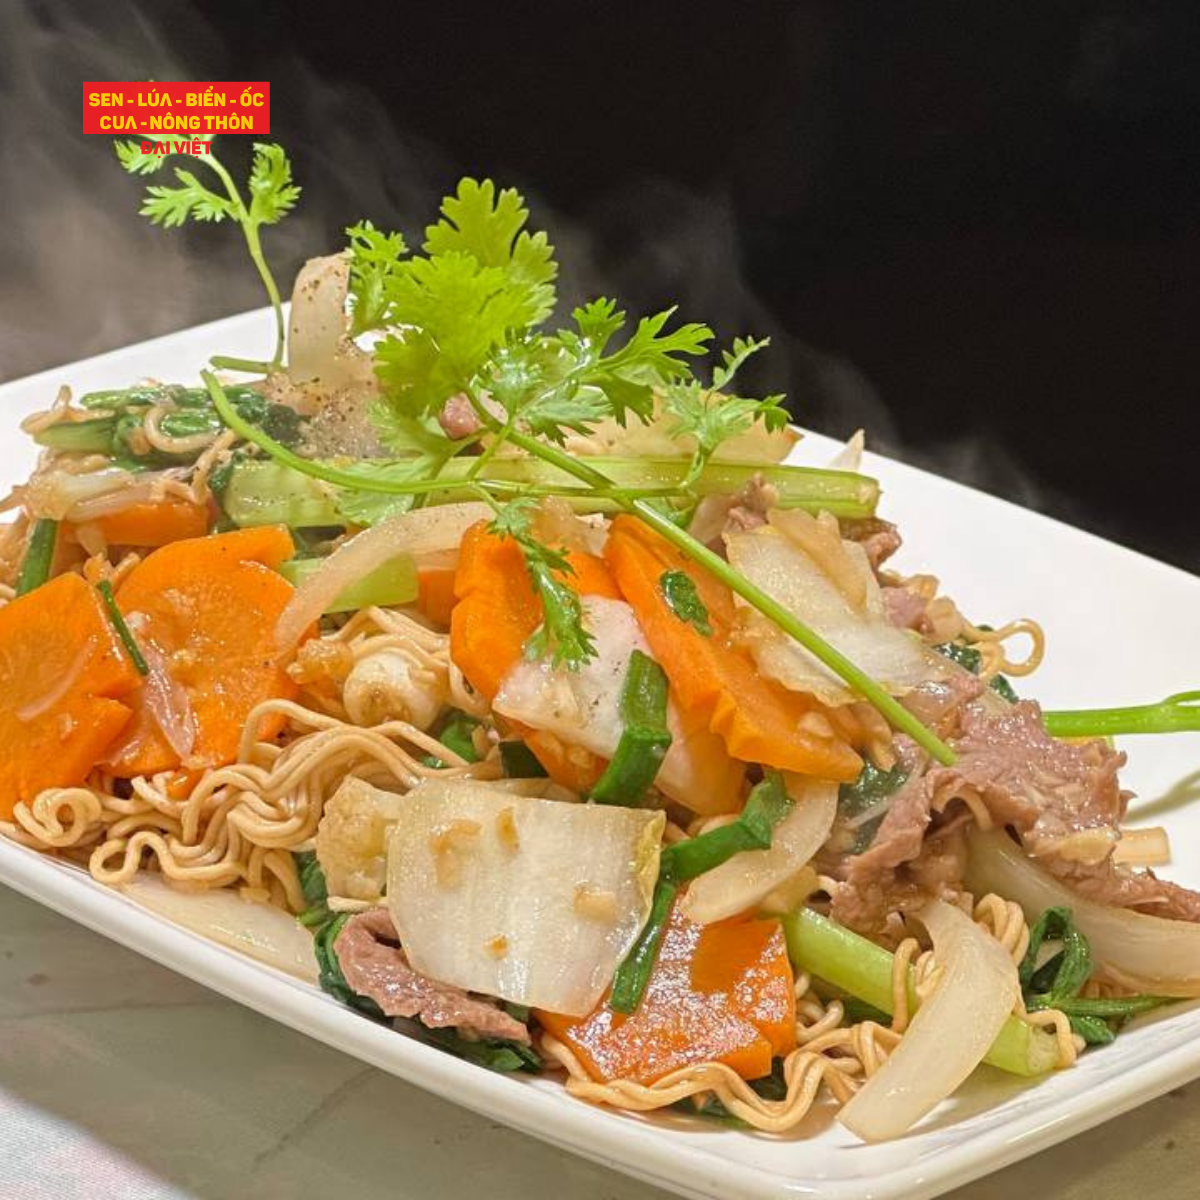  Stir-fried Noodle With Beef And Vegetables - Mì Xào Bò 